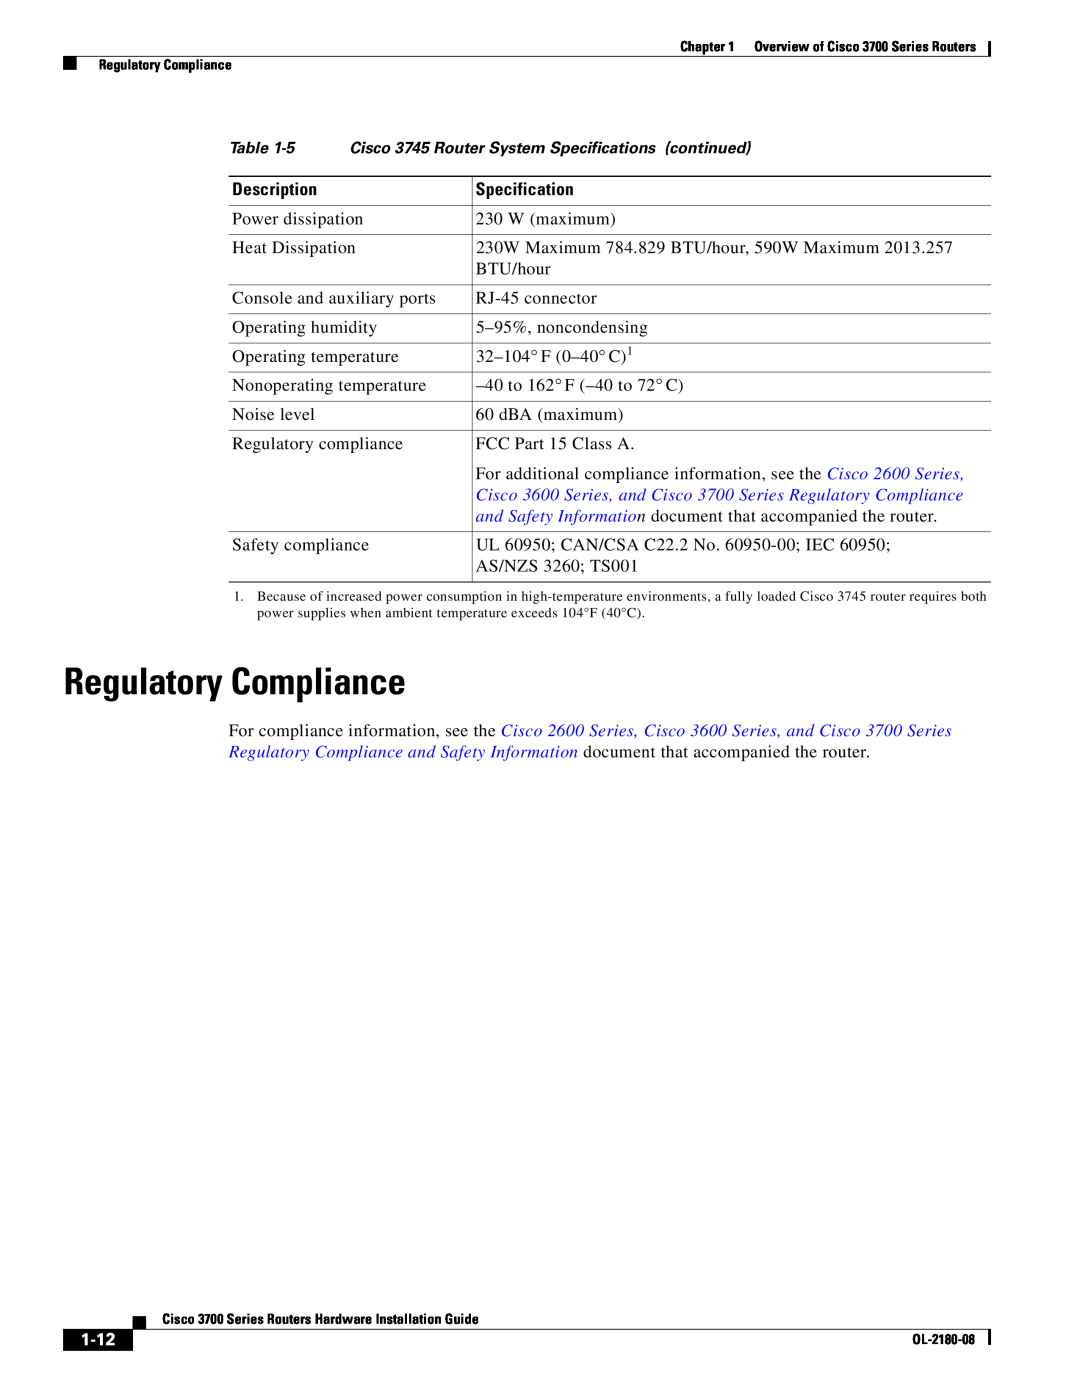 Cisco Systems 3700 Series manual Regulatory Compliance, 1-12, Cisco 3745 Router System Specifications continued 